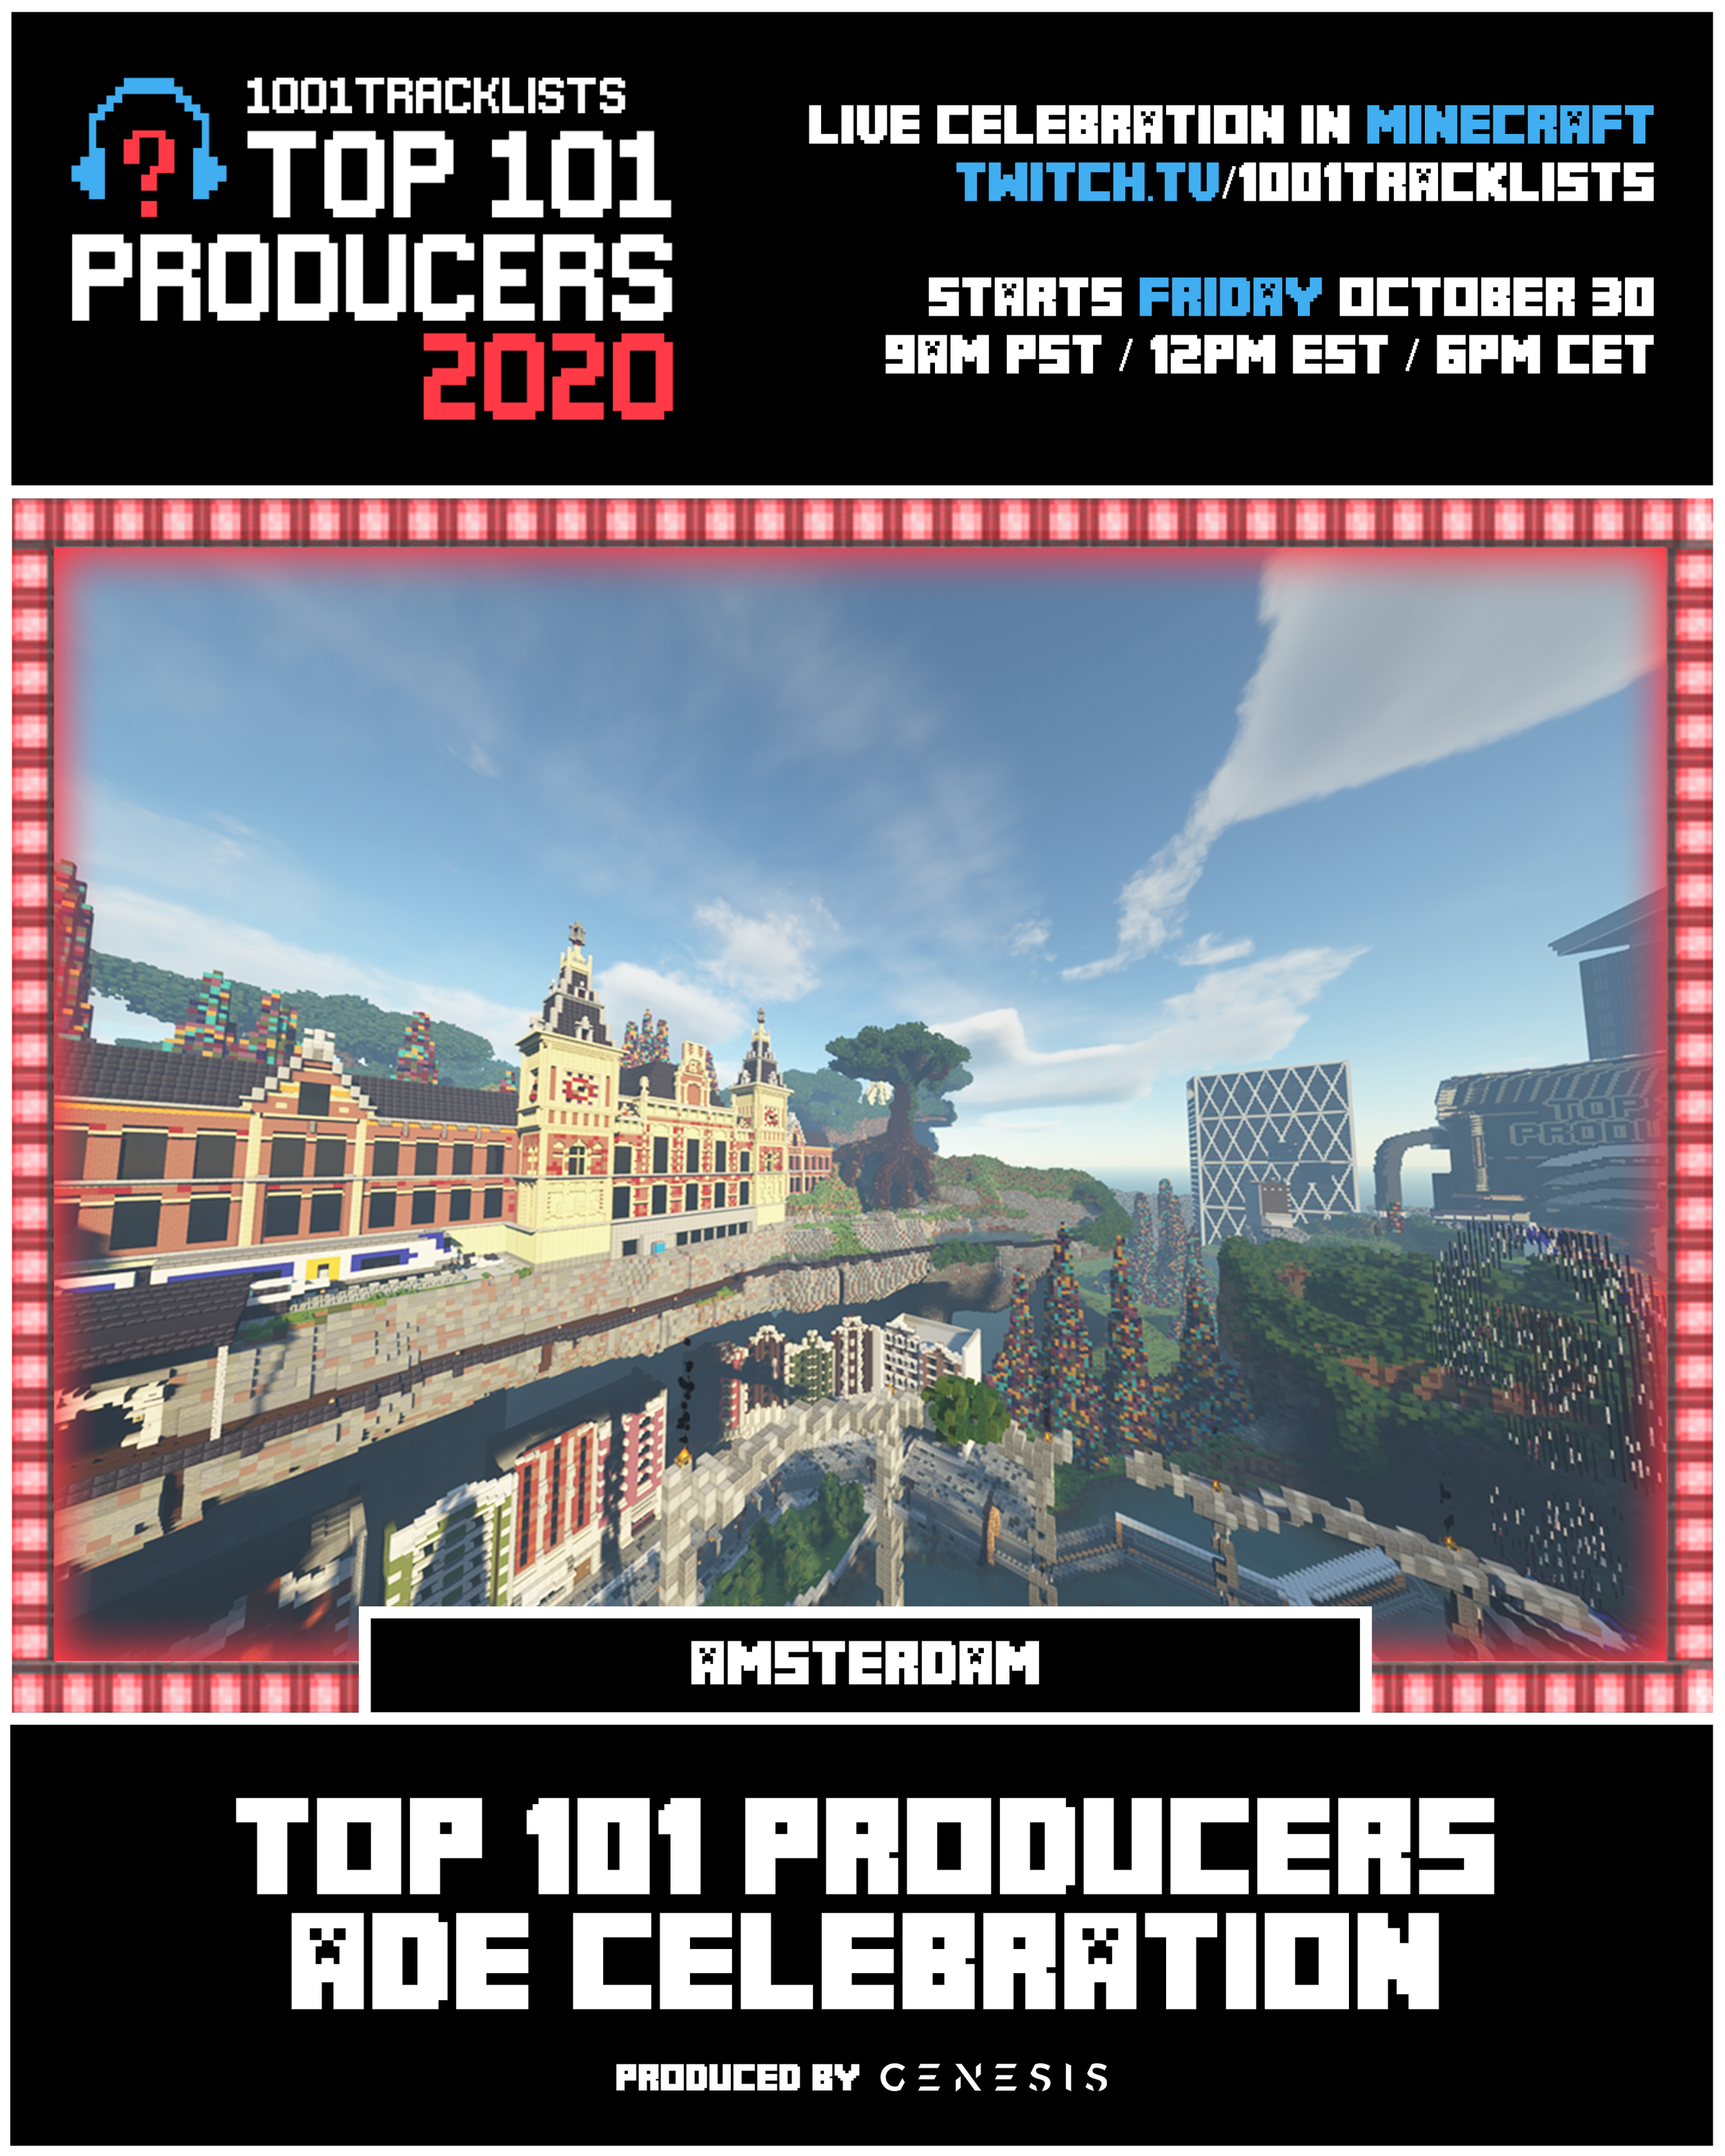 1001tracklists Announces Return Of Annual Top 101 Producers List Canadianravers Top 101 producers of 2020. canadianravers